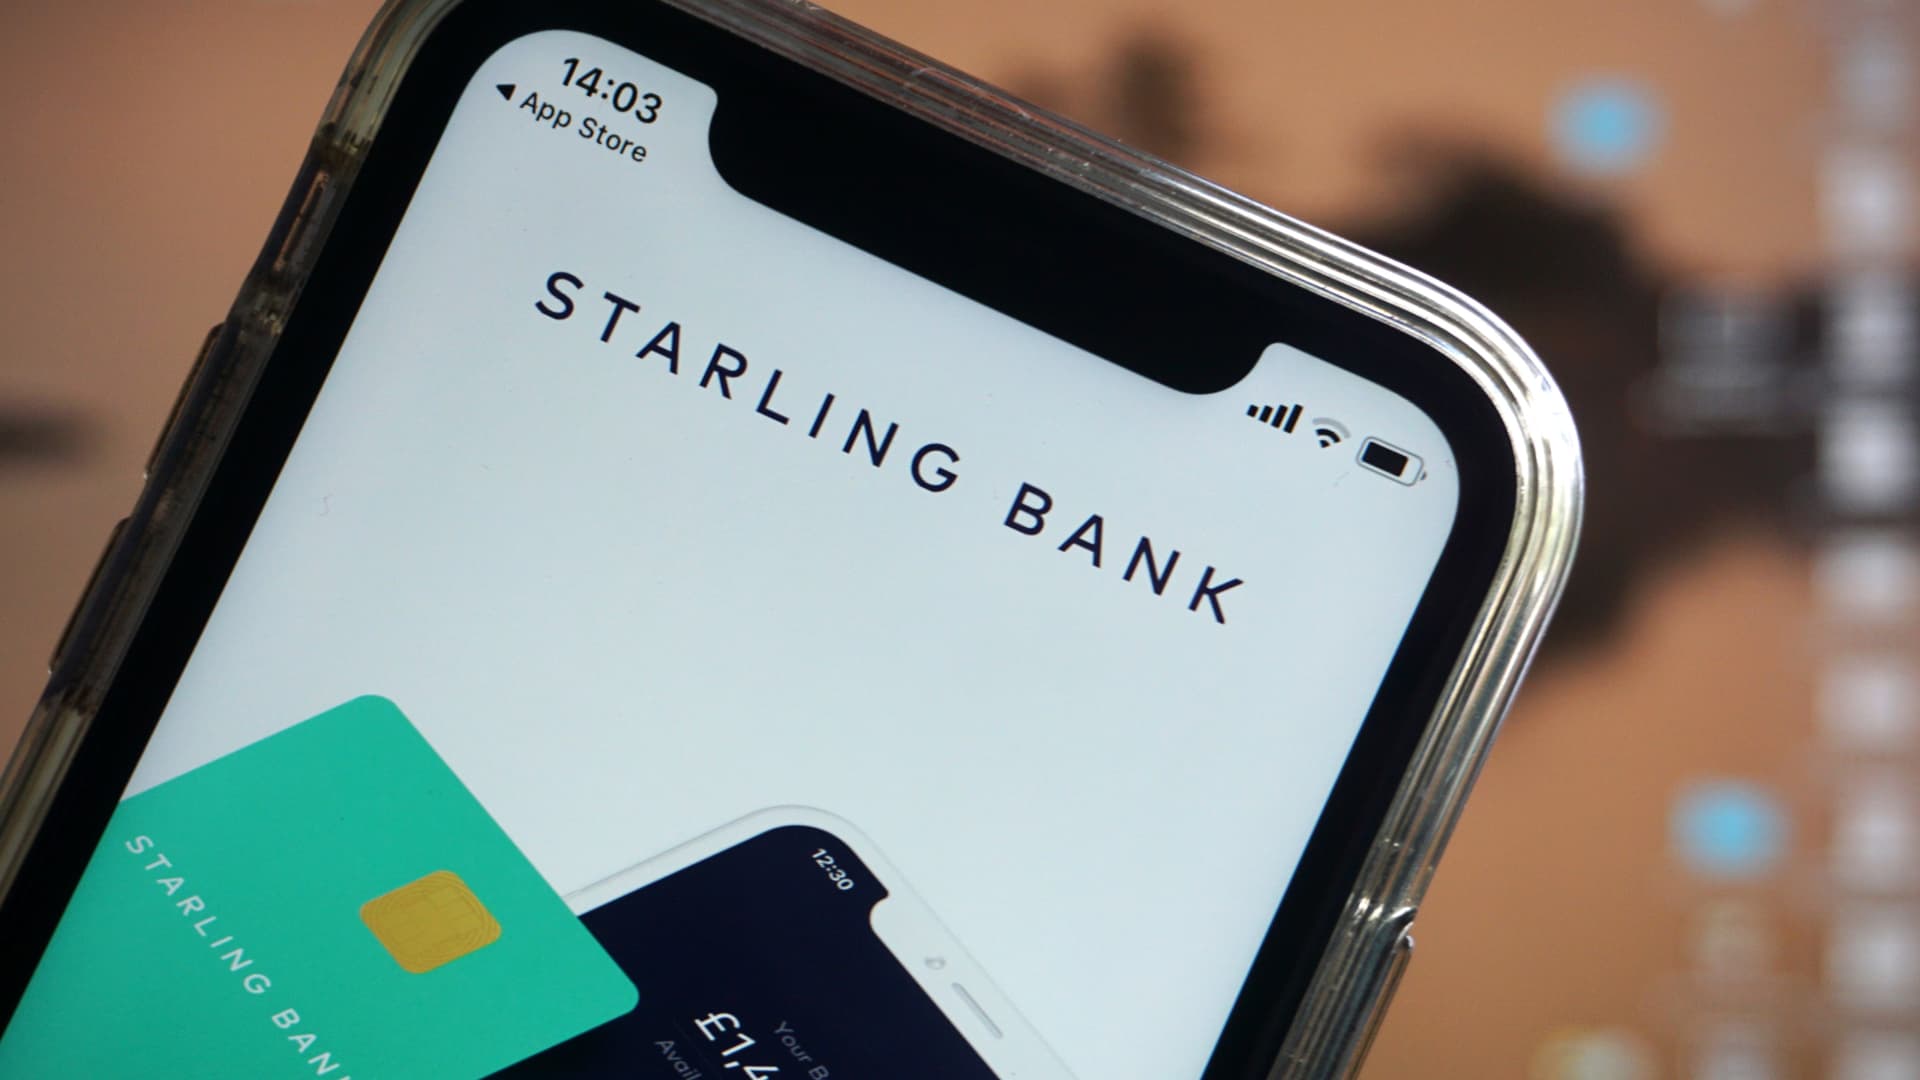 Goldman-backed digital bank Starling reports its first annual profit as other fintechs stumble